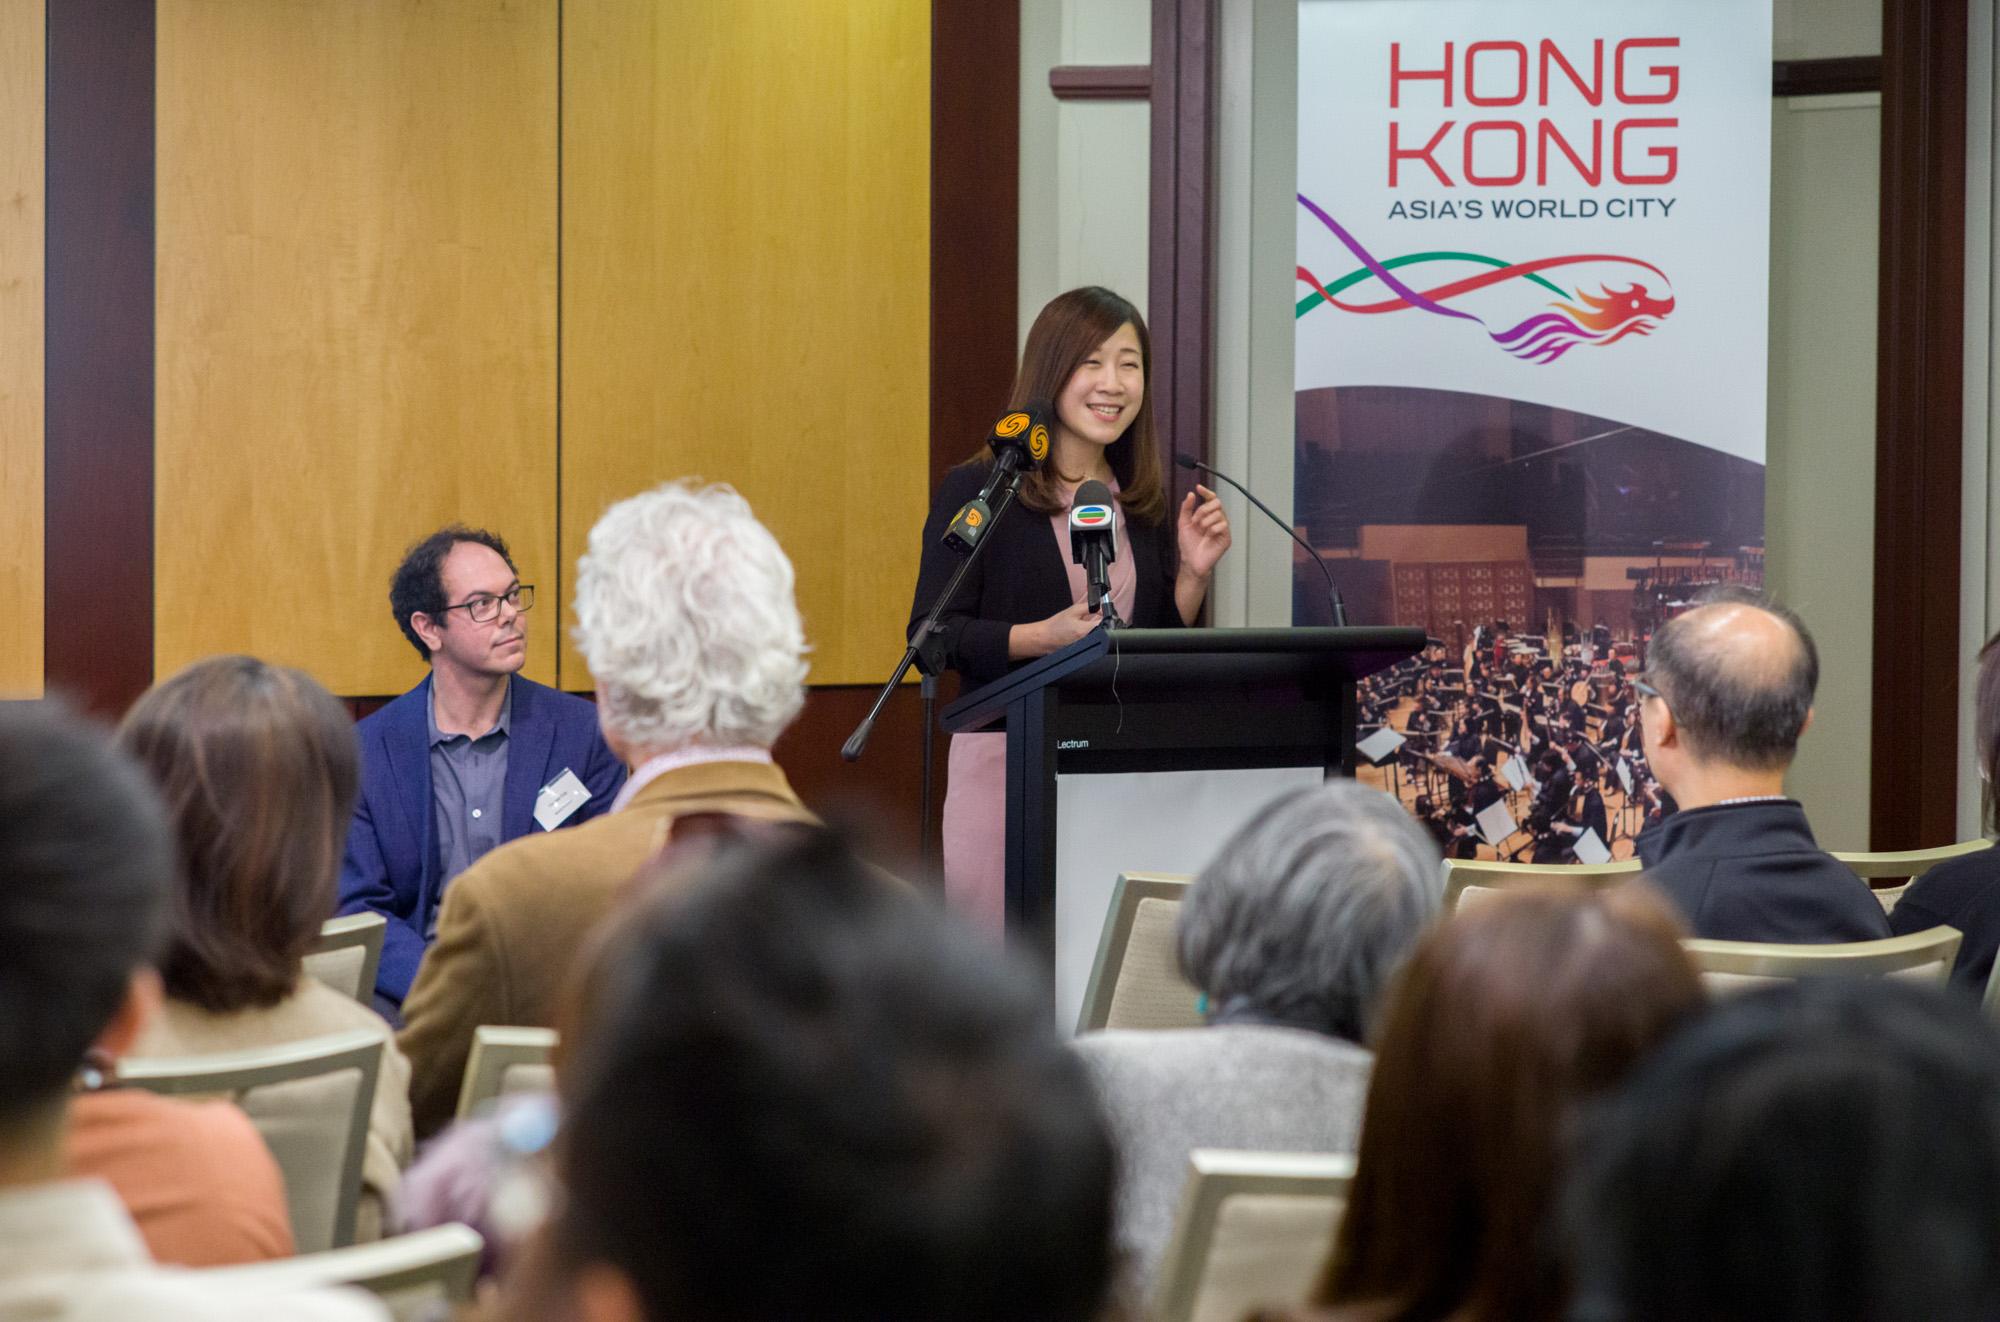 The Director of the Hong Kong Economic and Trade Office, Sydney, Miss Trista Lim, delivers welcoming remarks at an "Arts Forum x Networking Reception" held in Sydney, Australia, today (June 13) to highlight Hong Kong's latest developments in arts and culture and its unique advantages as an East-meets-West centre for international cultural exchange.
